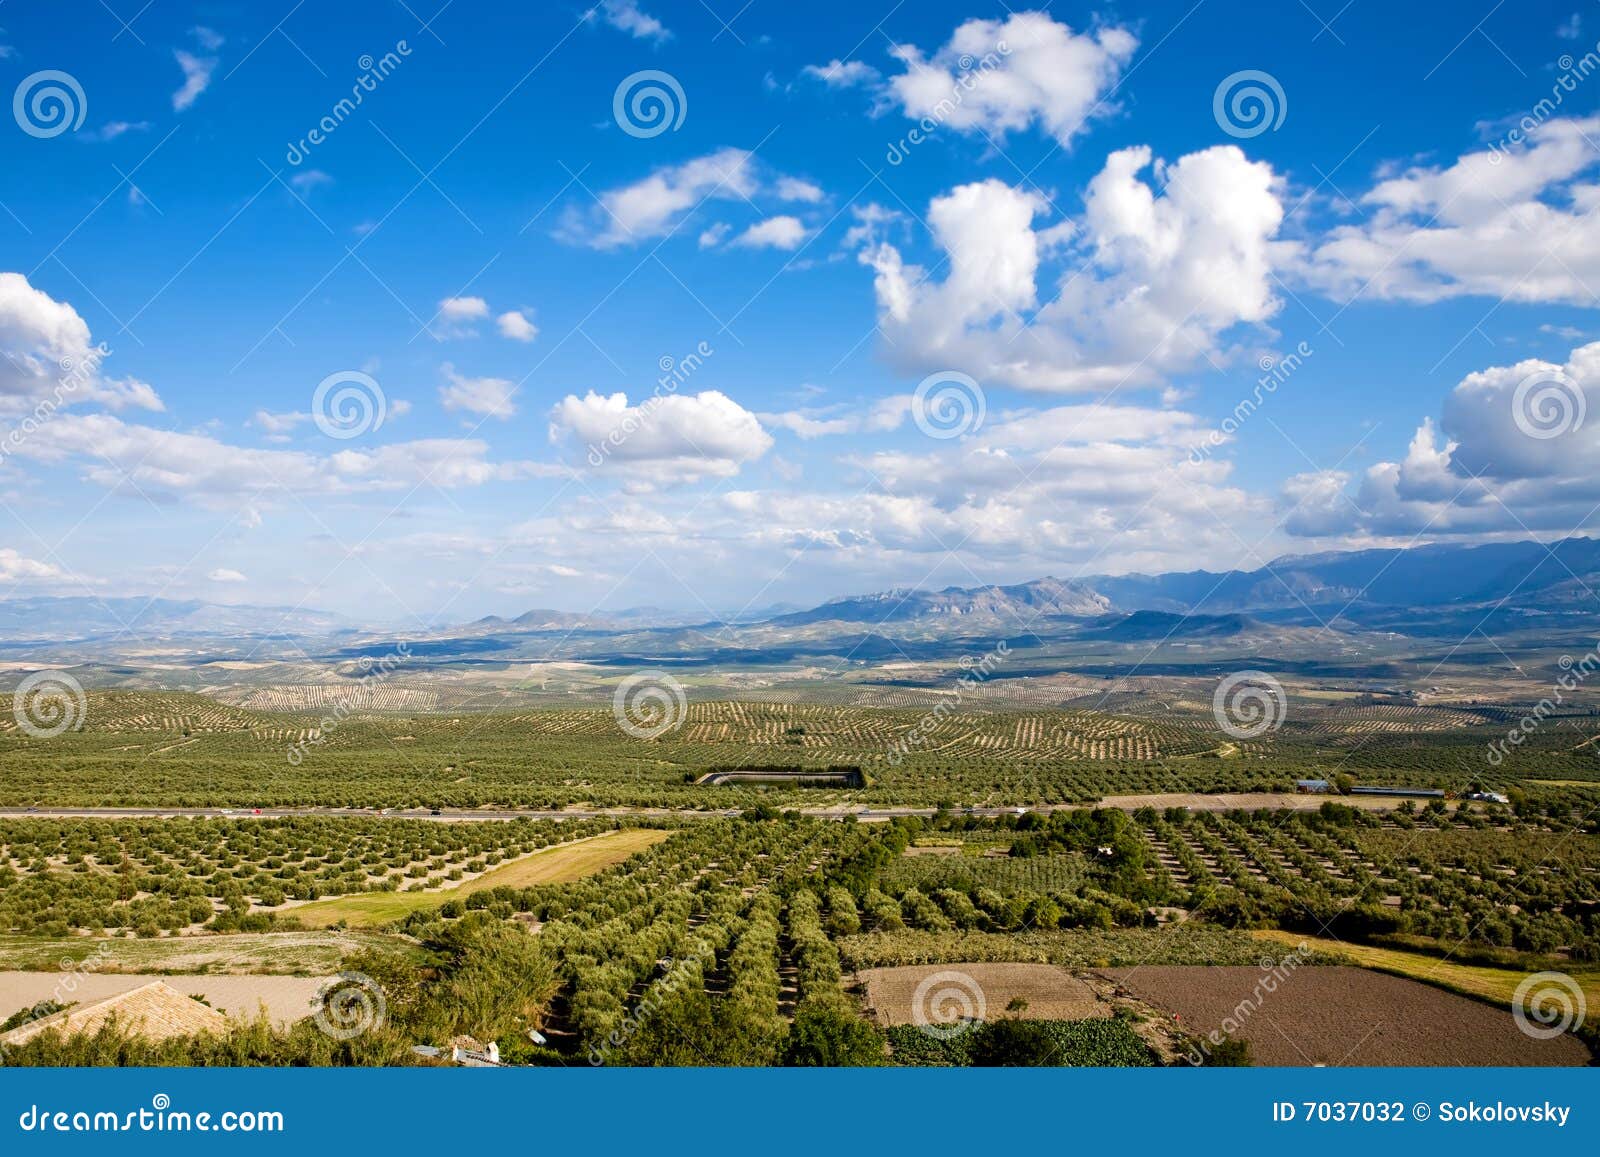 magnificent panorama of olive groves